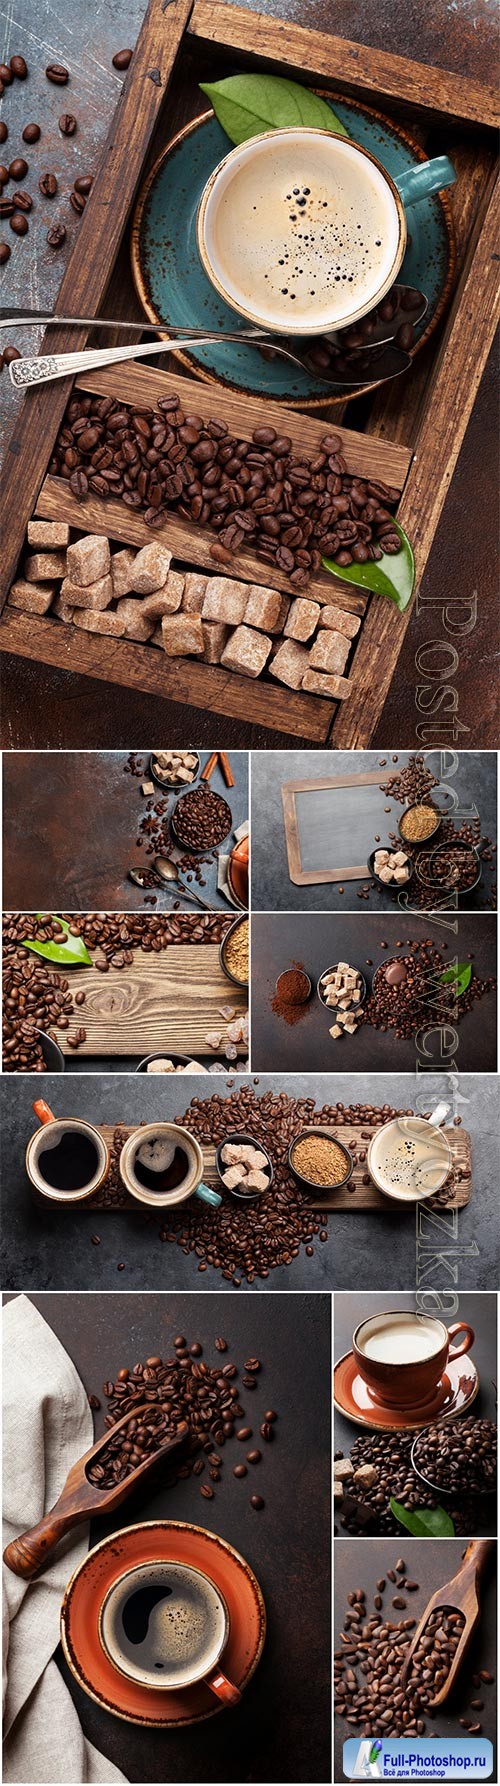 Coffee cup beans and sugar beautiful stock photo